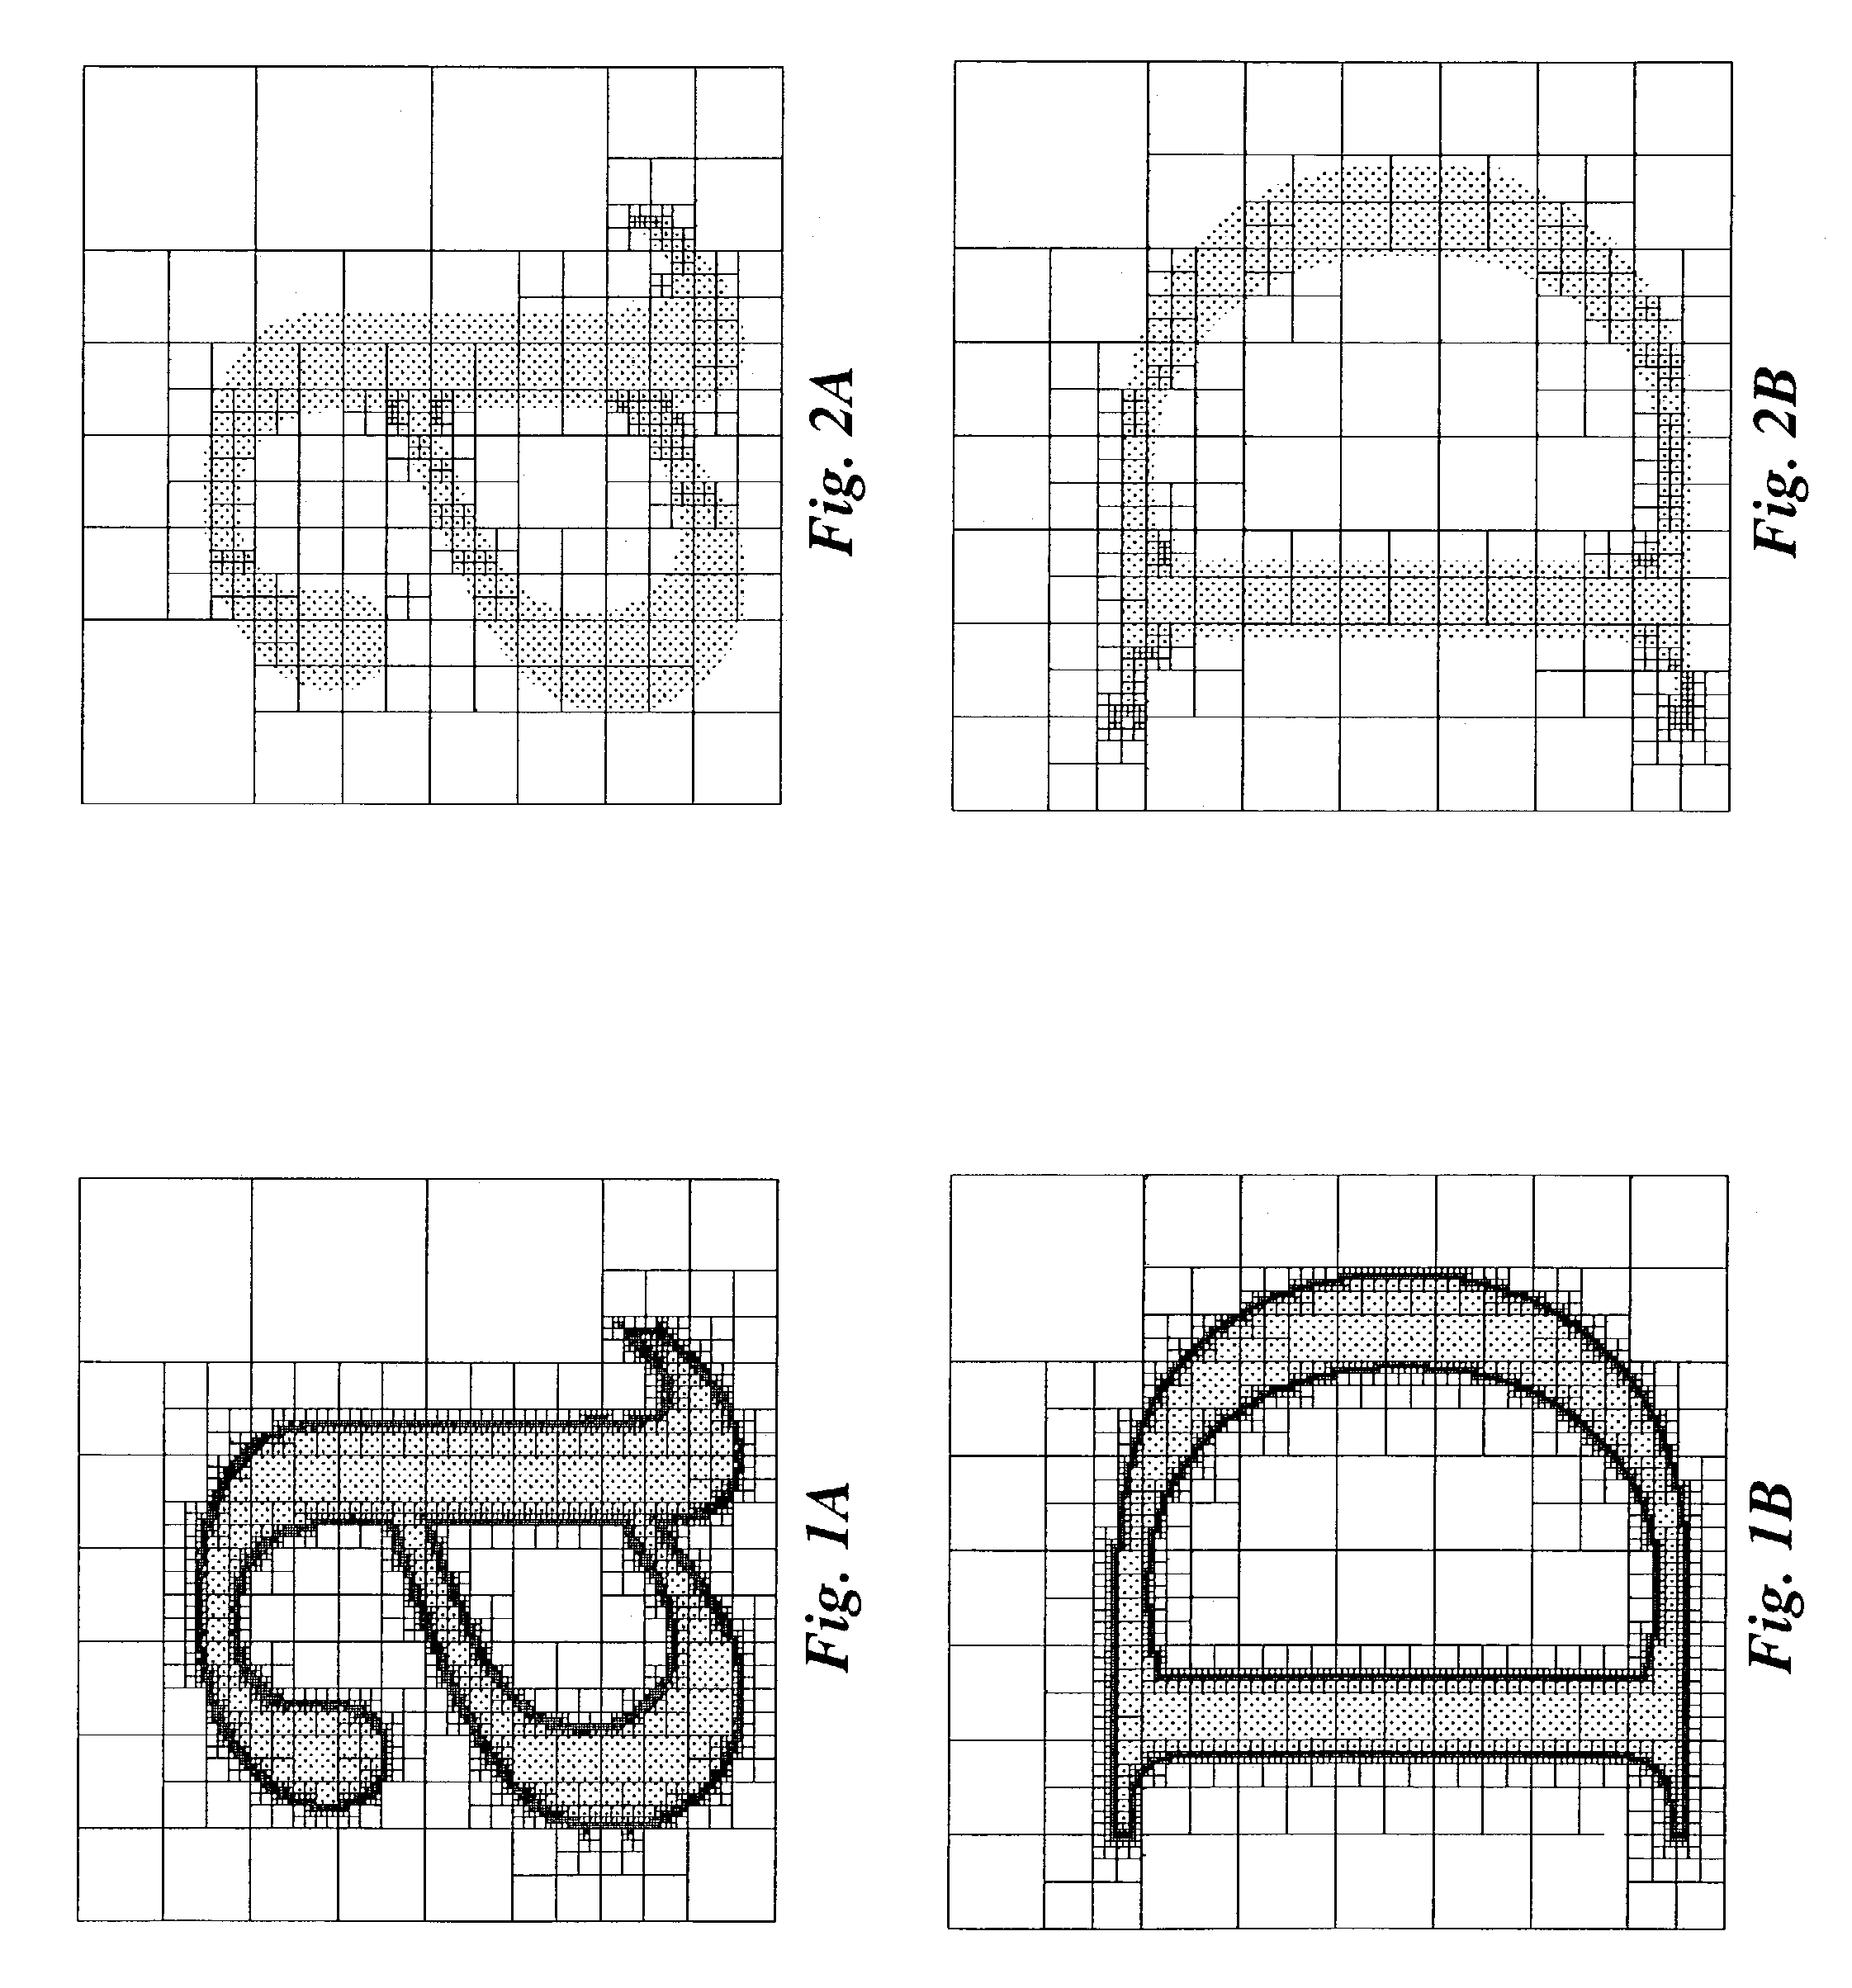 Method for antialiasing an object represented as a two-dimensional distance field in image-order